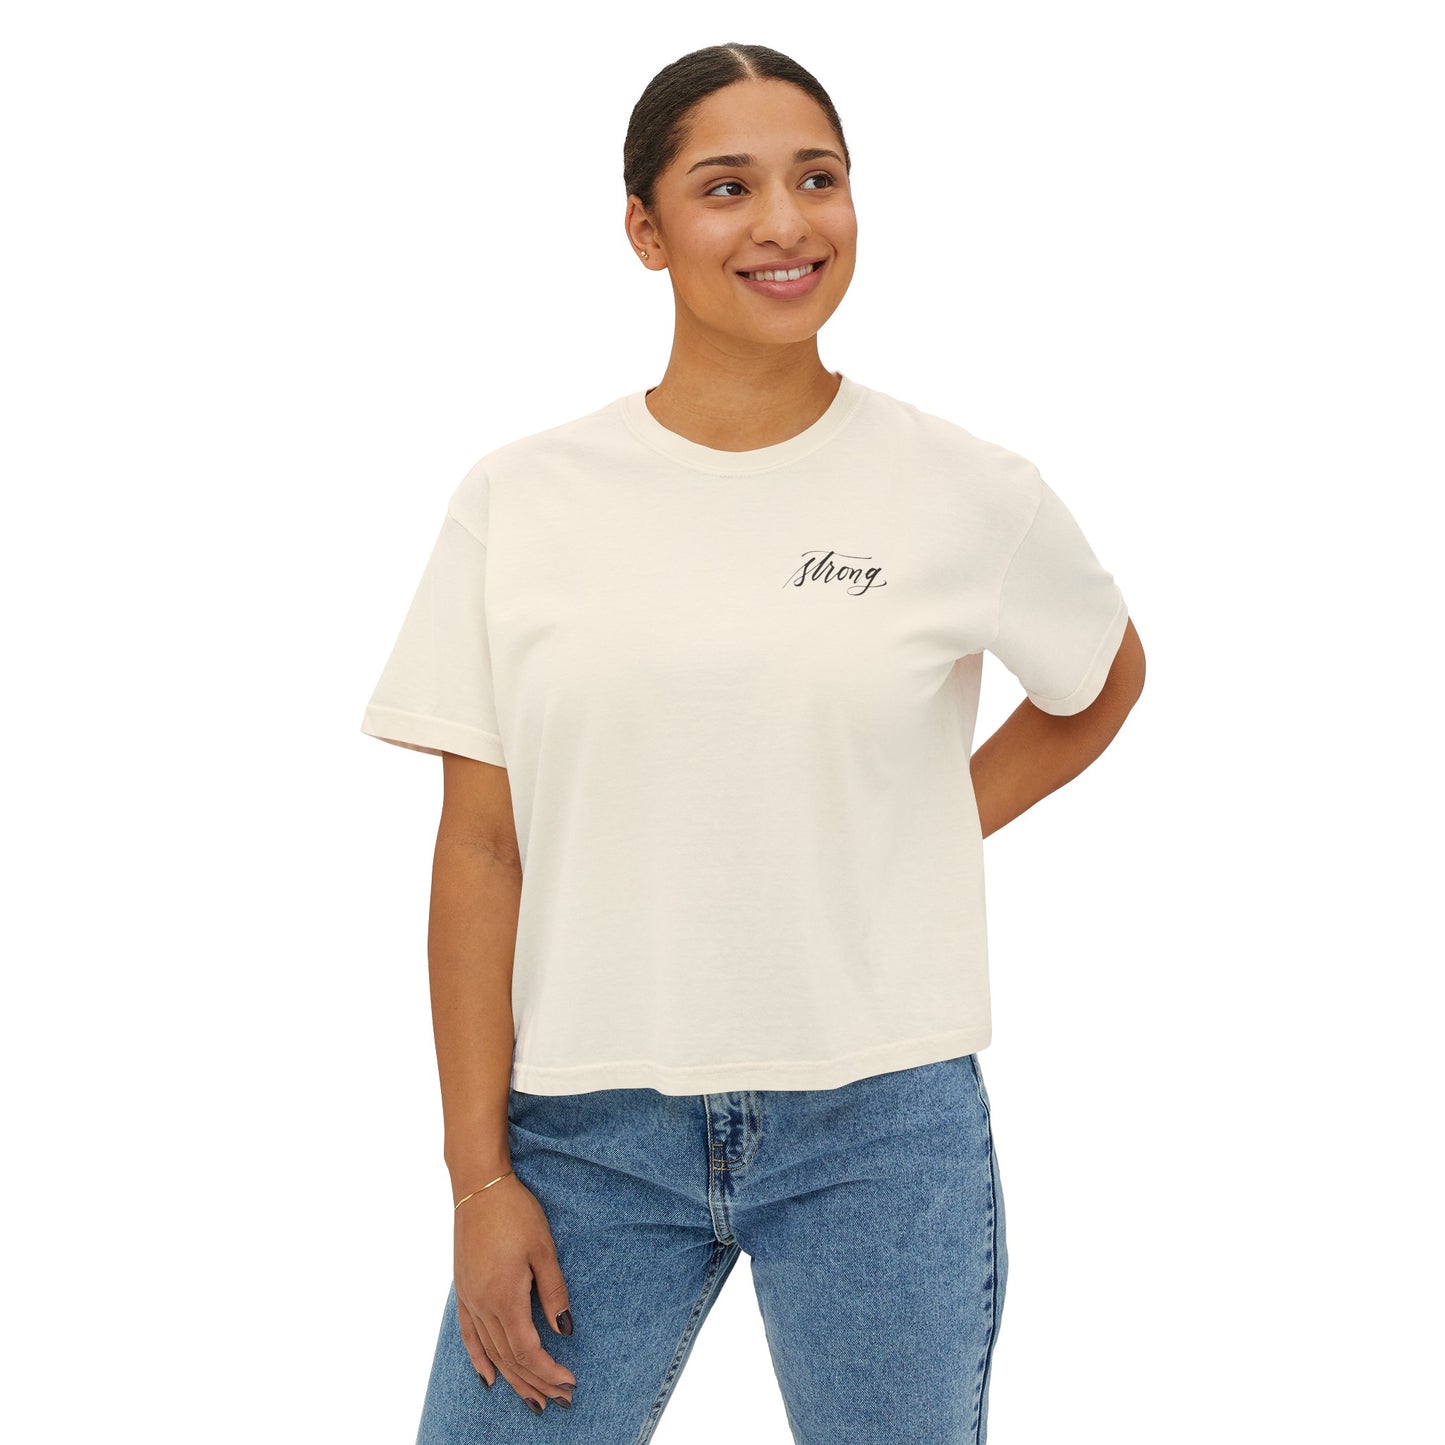 Script "Strong" Calligraphy Printed Everyday Women's Boxy Tee